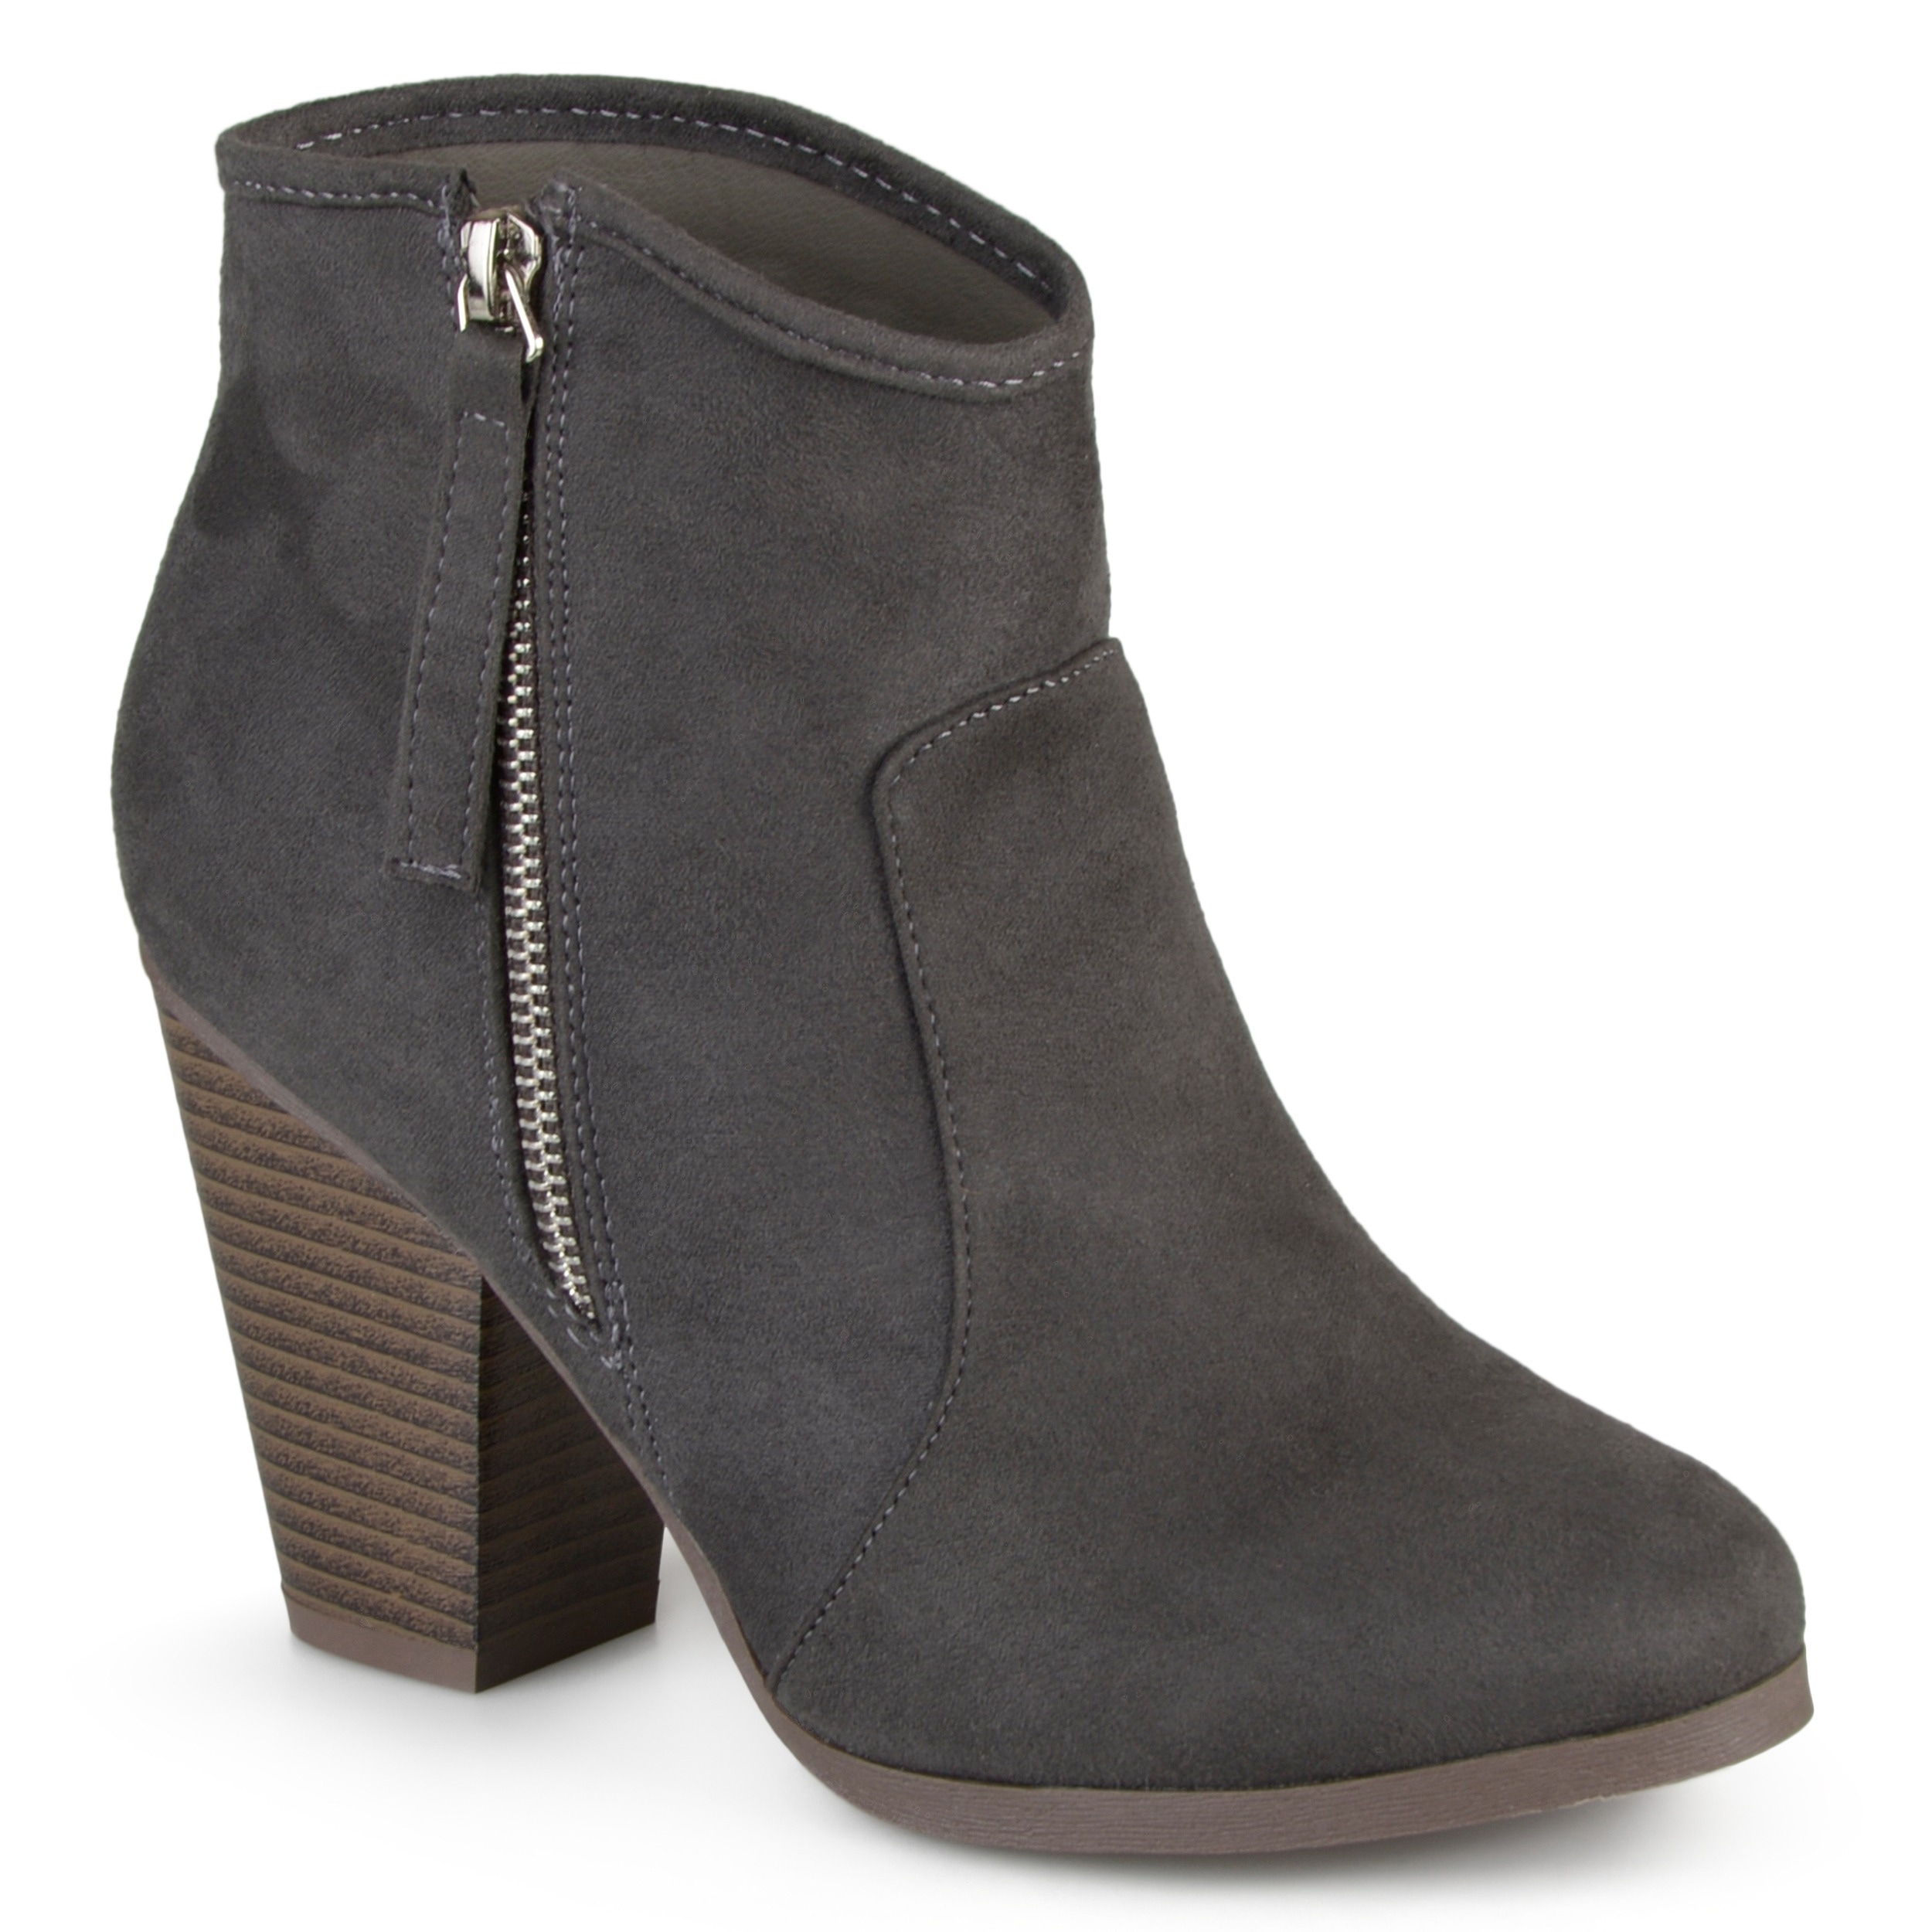 journee collection link women's ankle boots